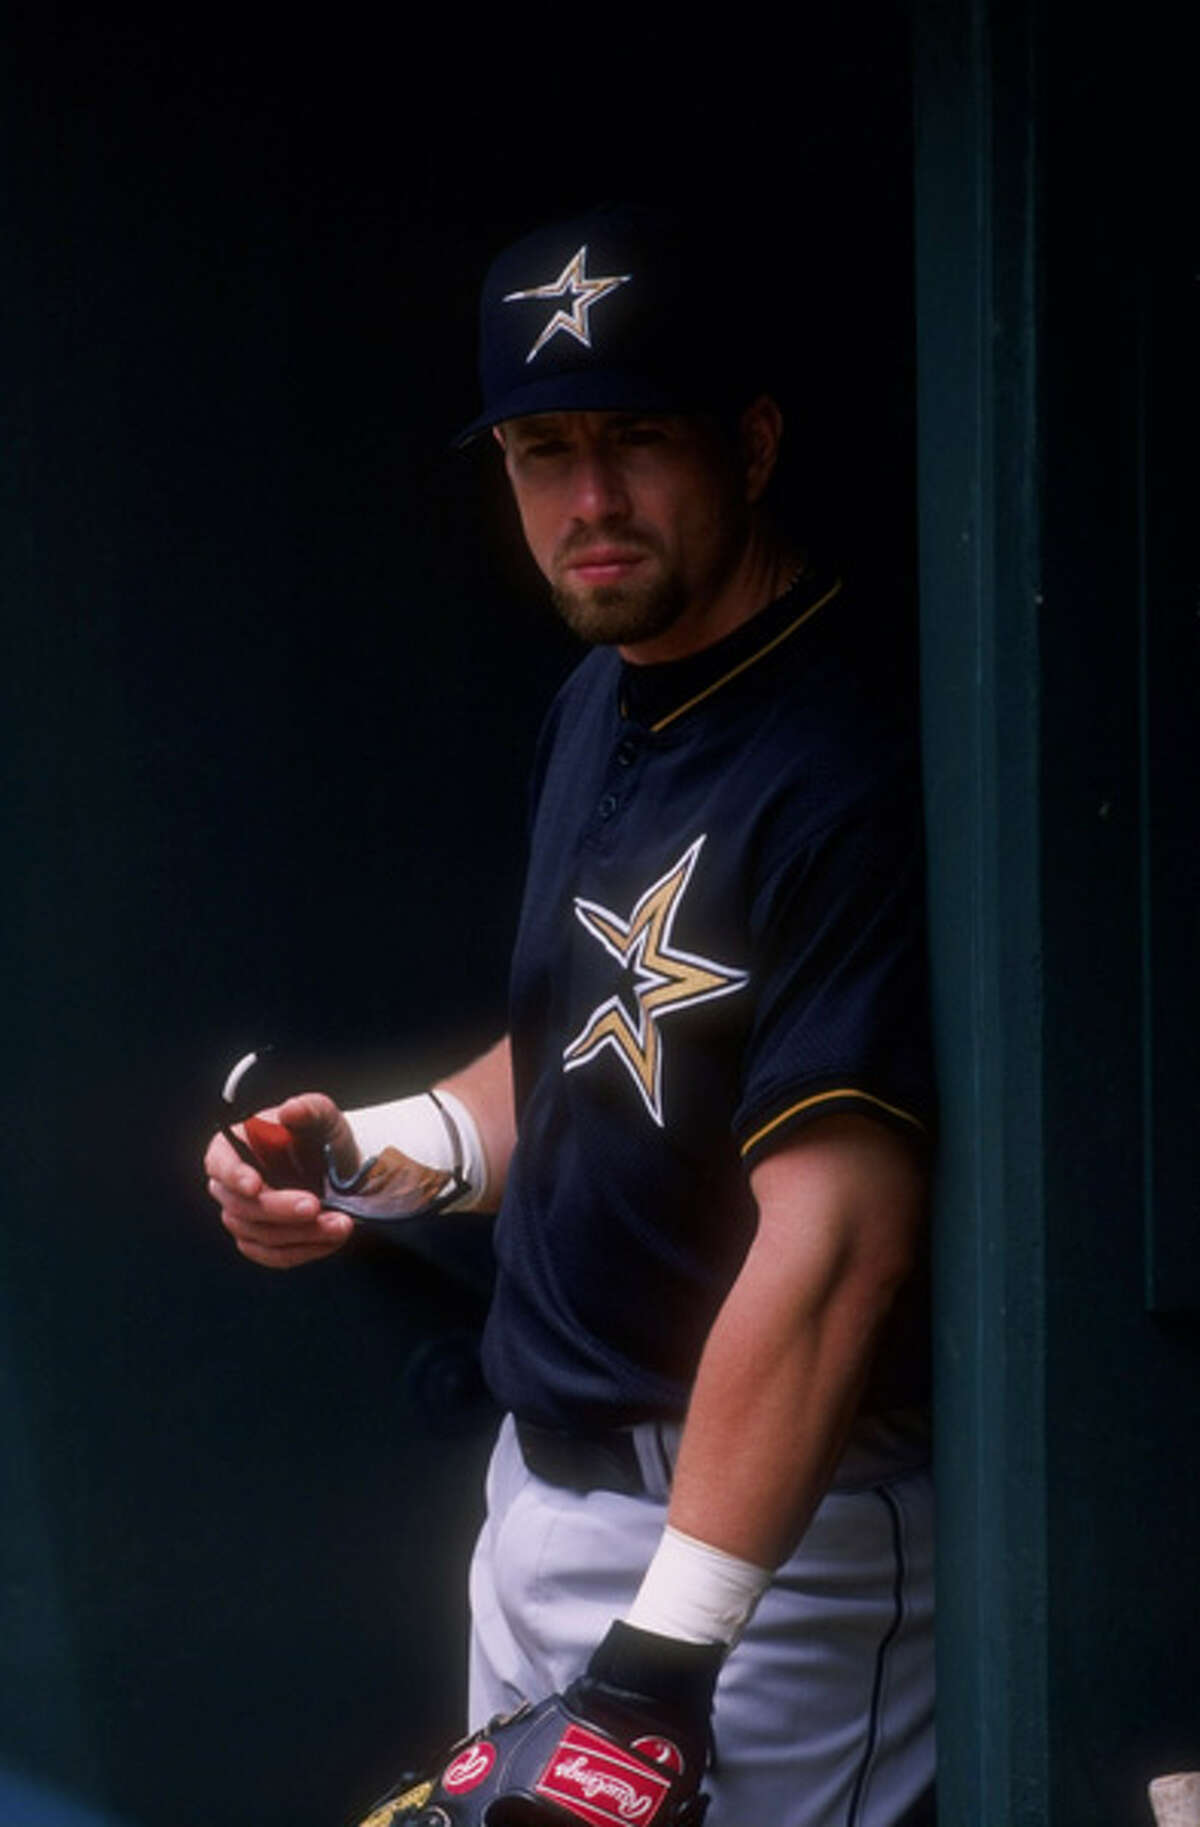 What cap will Bagwell wear in the Hall of Fame?